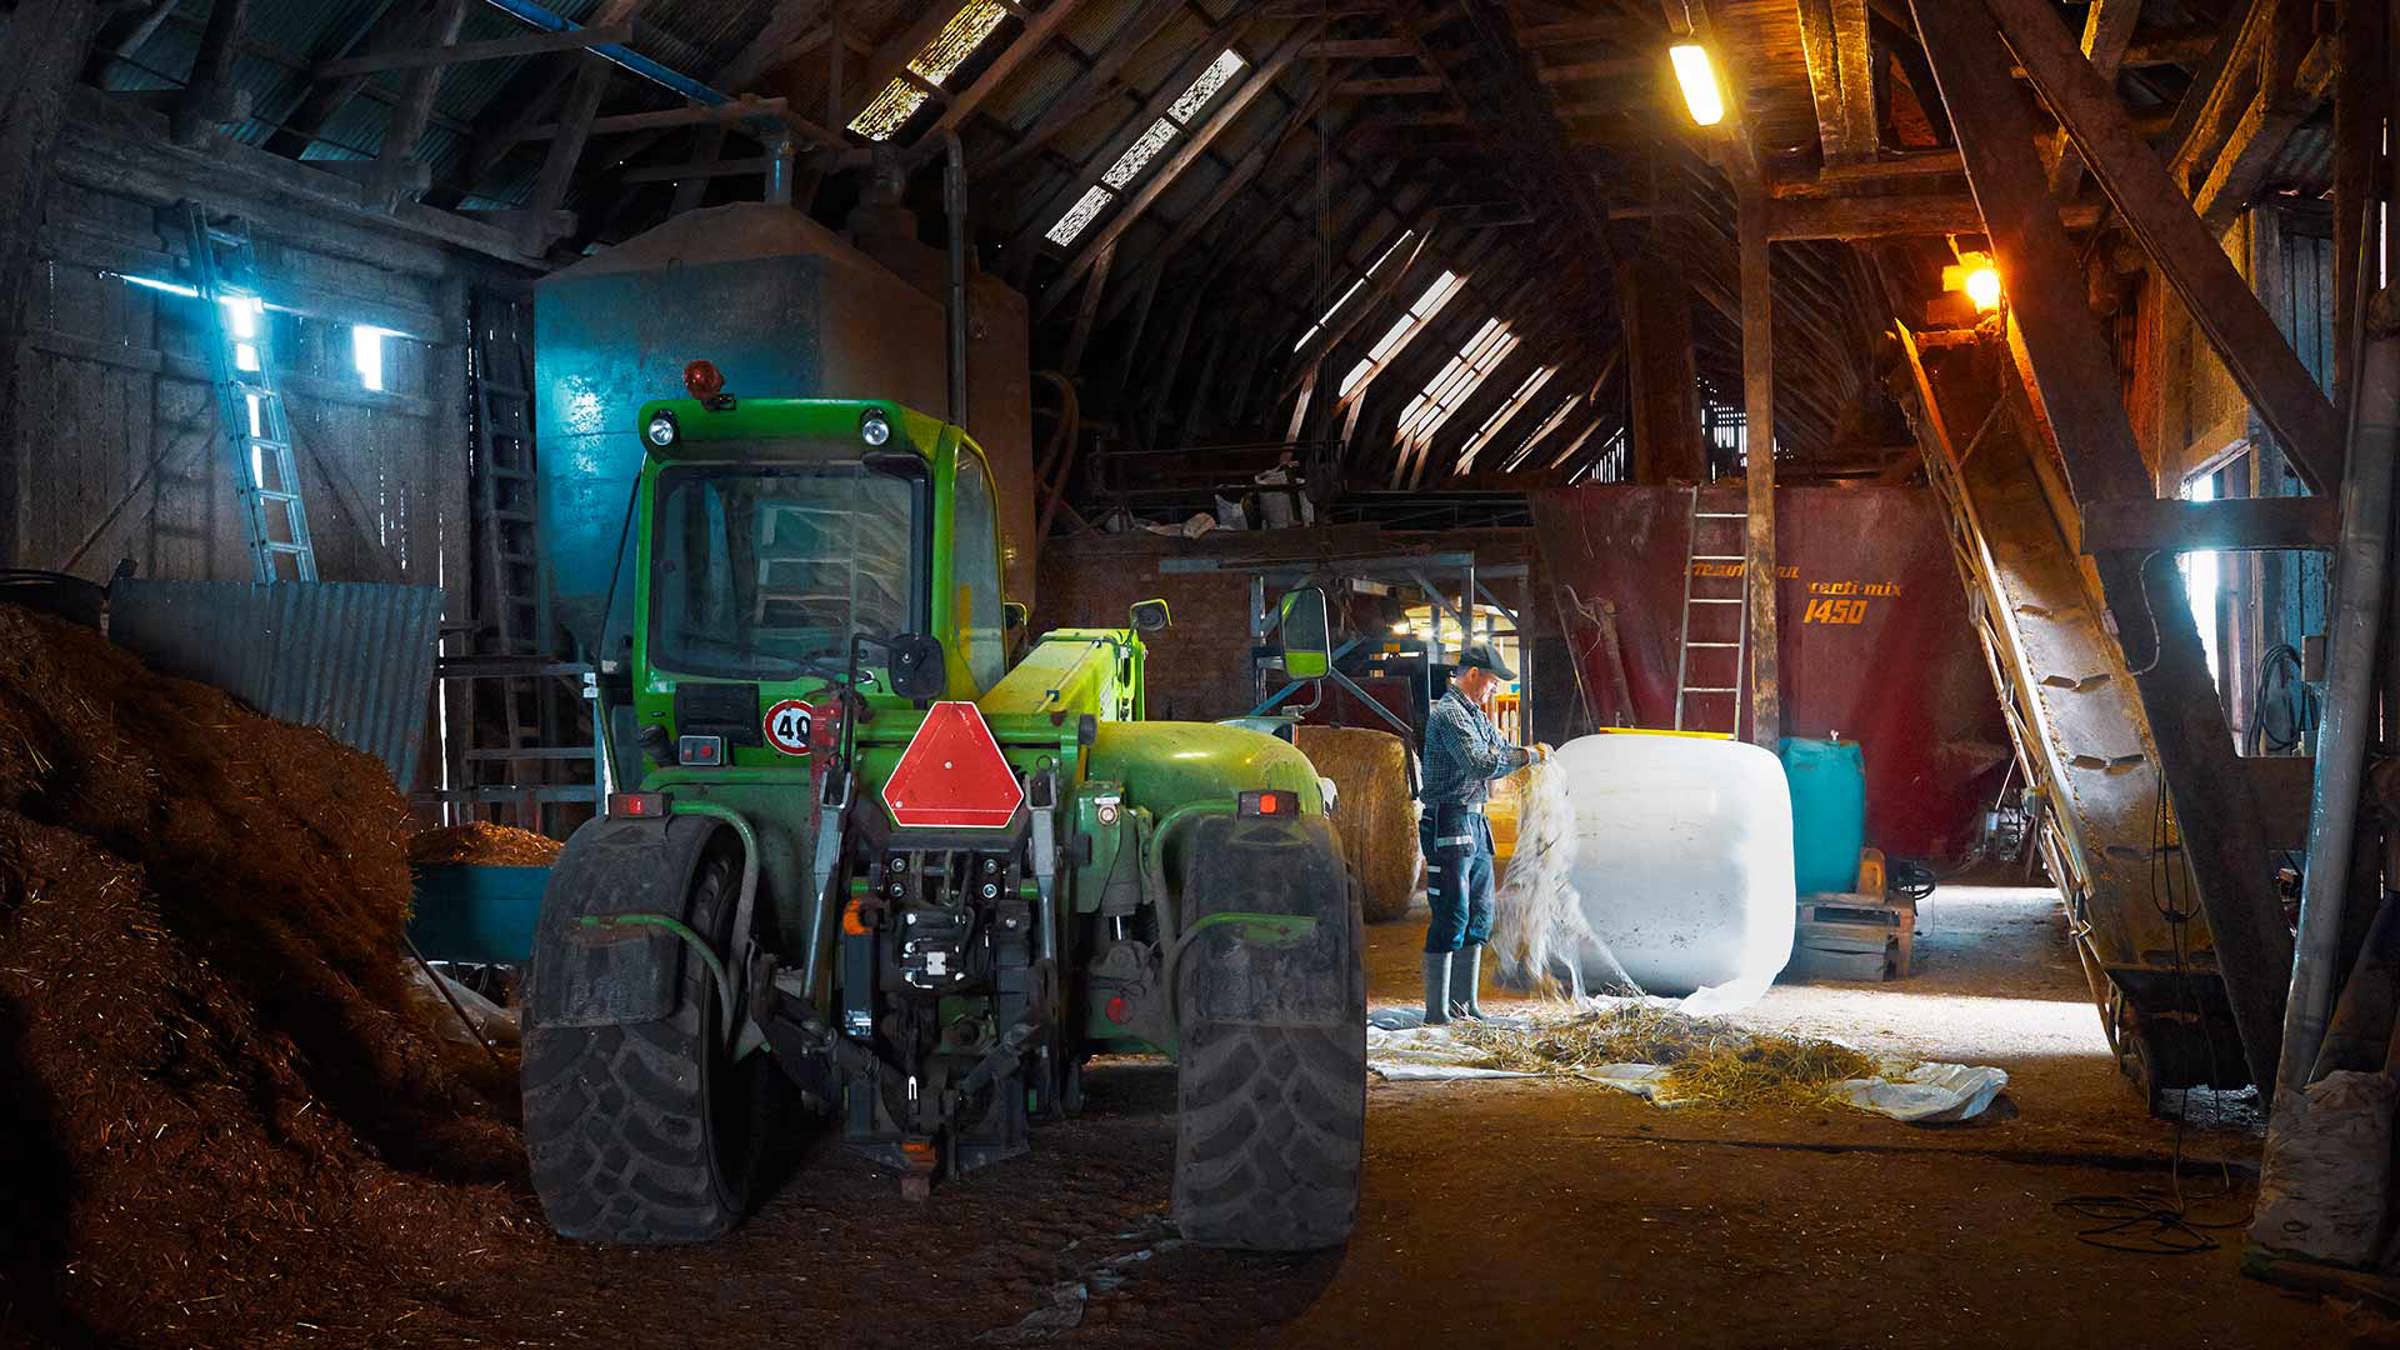 A farmer and his tractor in a barn